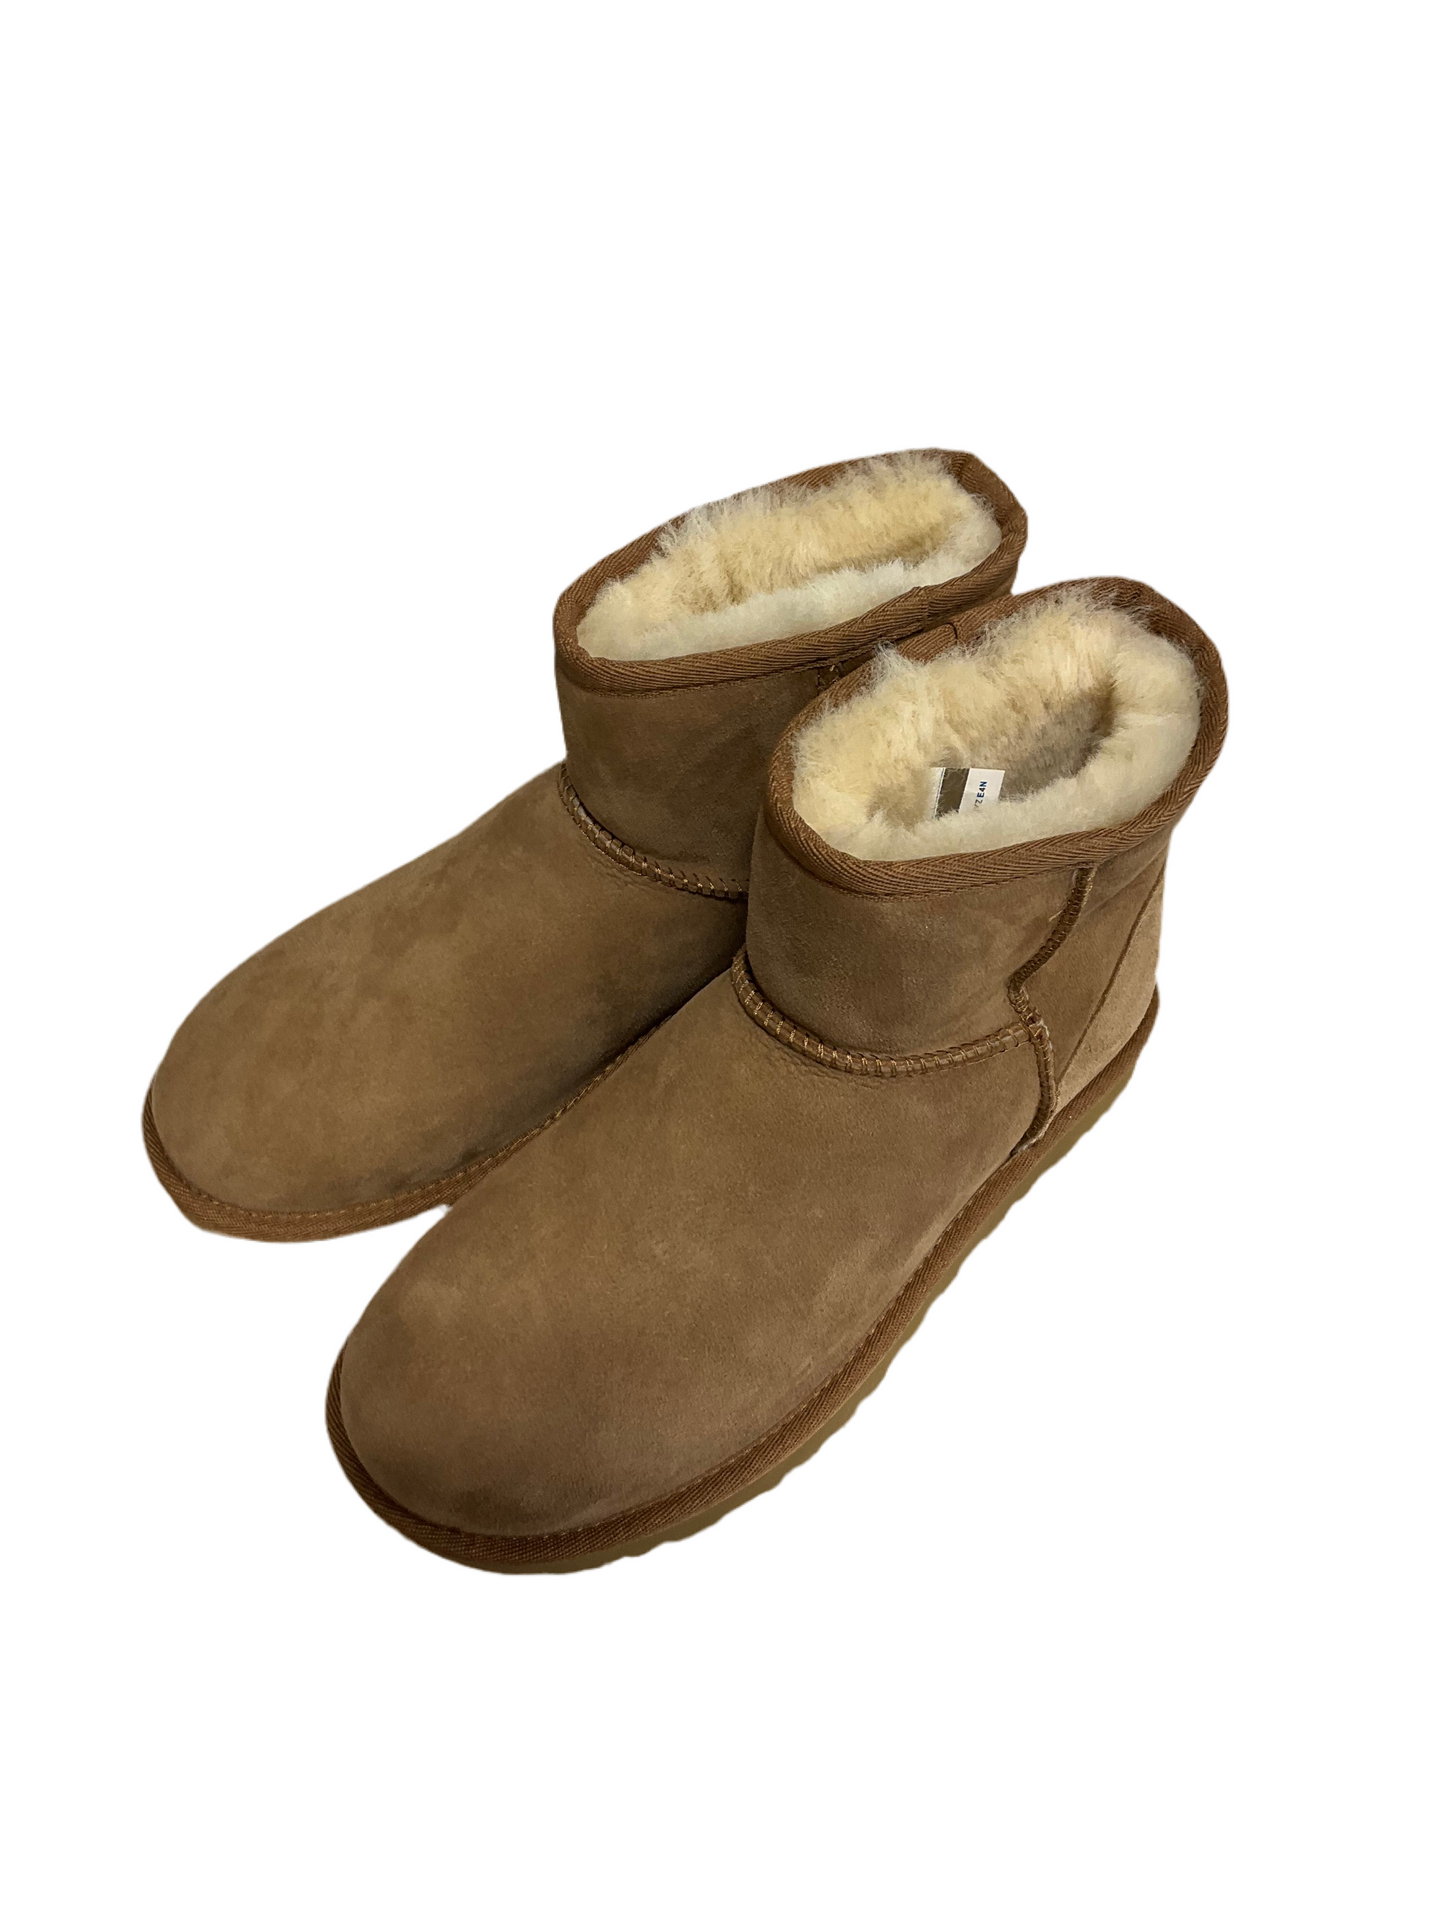 Brown Boots Ankle Flats Ugg, Size 7